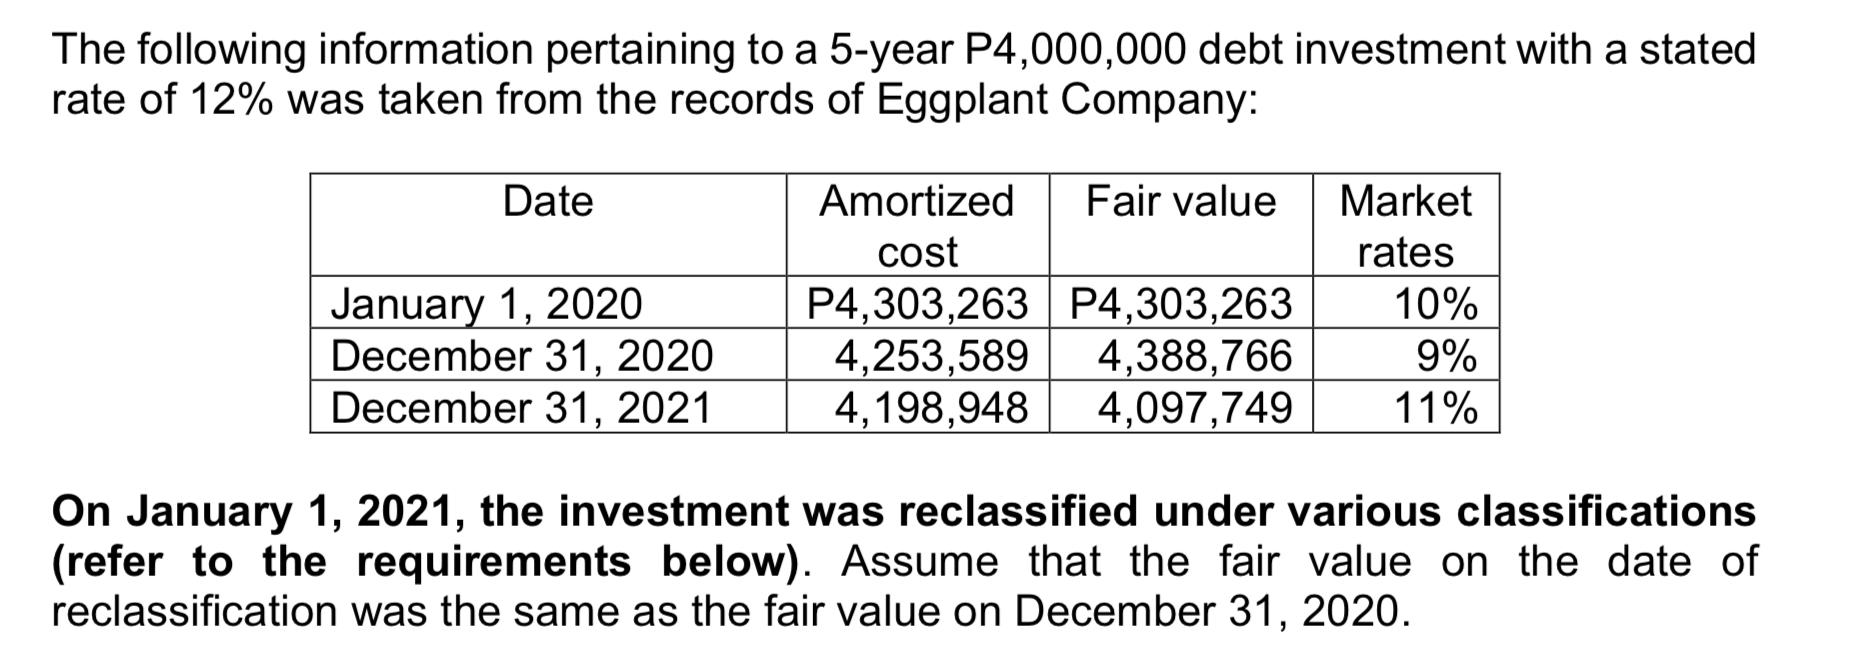 The following information pertaining to a 5-year P4,000,000 debt investment with a statedrate of 12% was taken from the reco